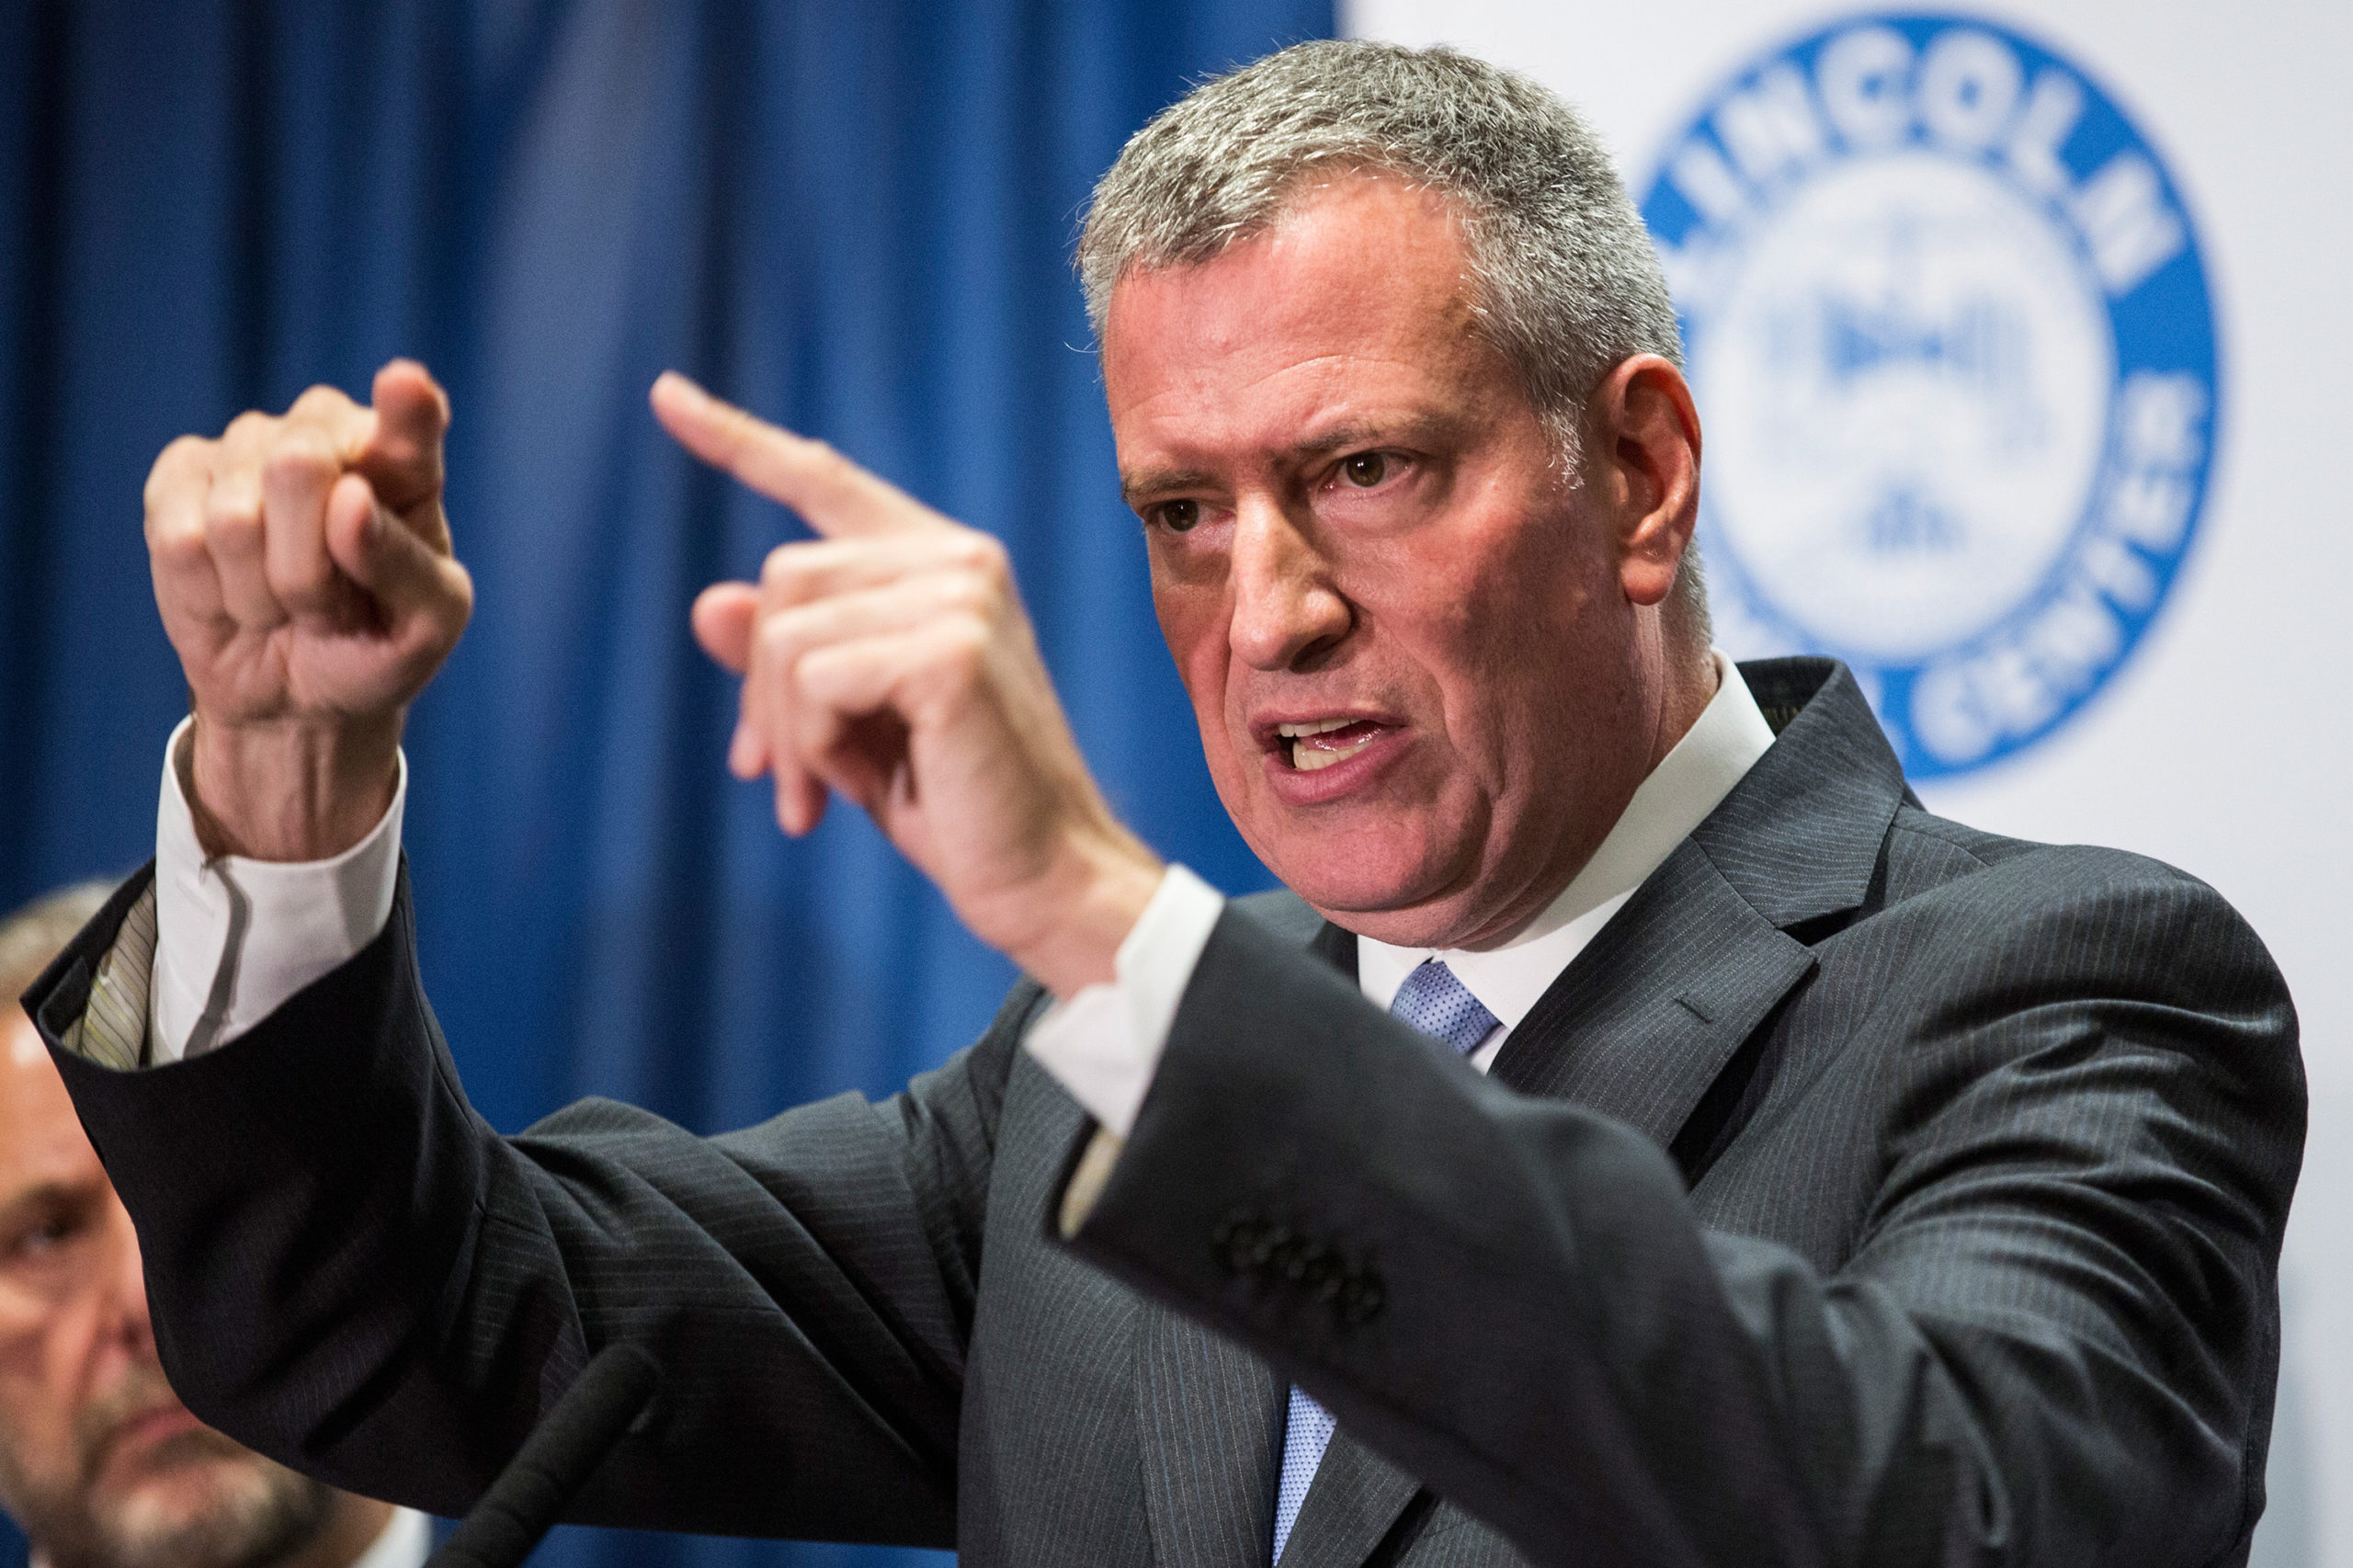 New York City Mayor Bill de Blasio speaks at a press conference to address the Legionnaire's disease outbreak in the city at Lincoln Hospital on August 4, 2015 in the Bronx borough of New York City. (Andrew Burton/Getty Images)